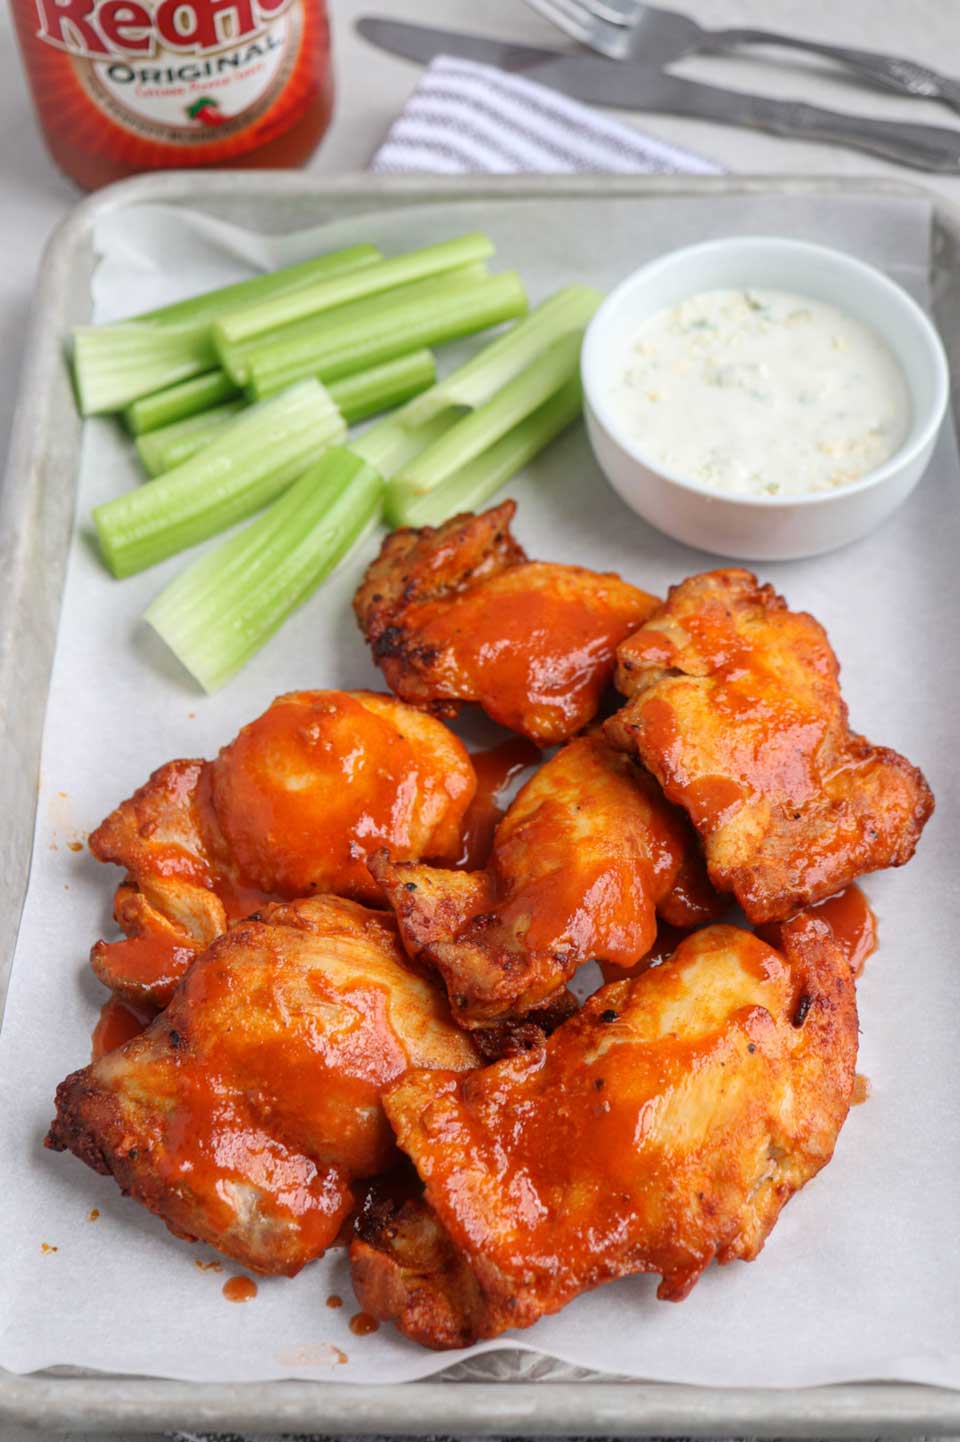 Several buffalo chicken pieces on paper-lined tray with ranch and celery sticks.